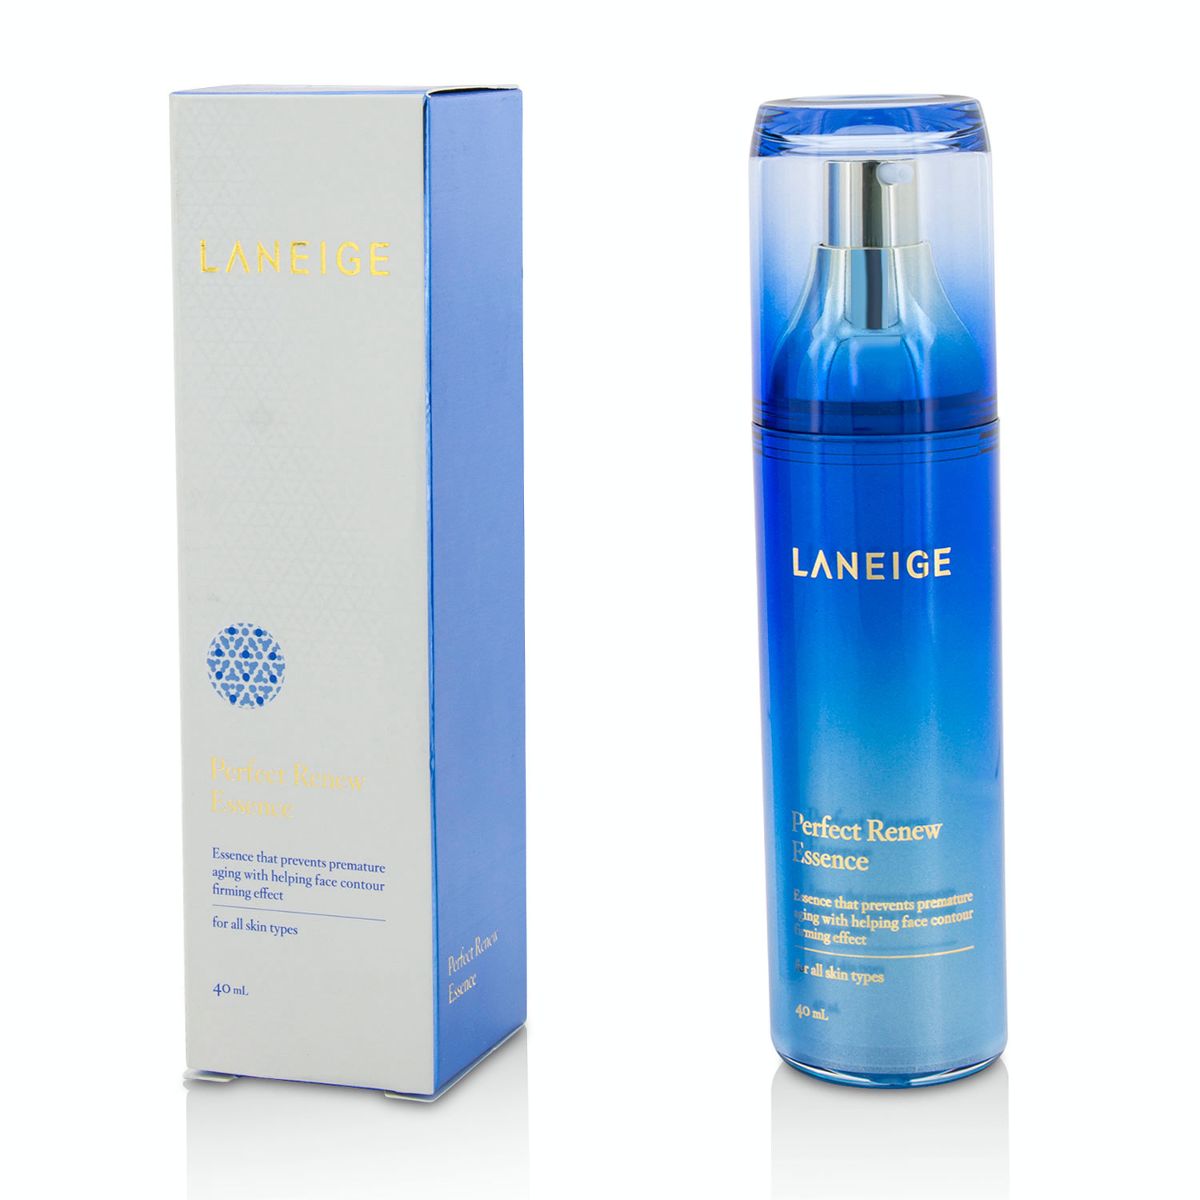 Perfect Renew Essence (Manufacture Date: 11/2014) Laneige Image